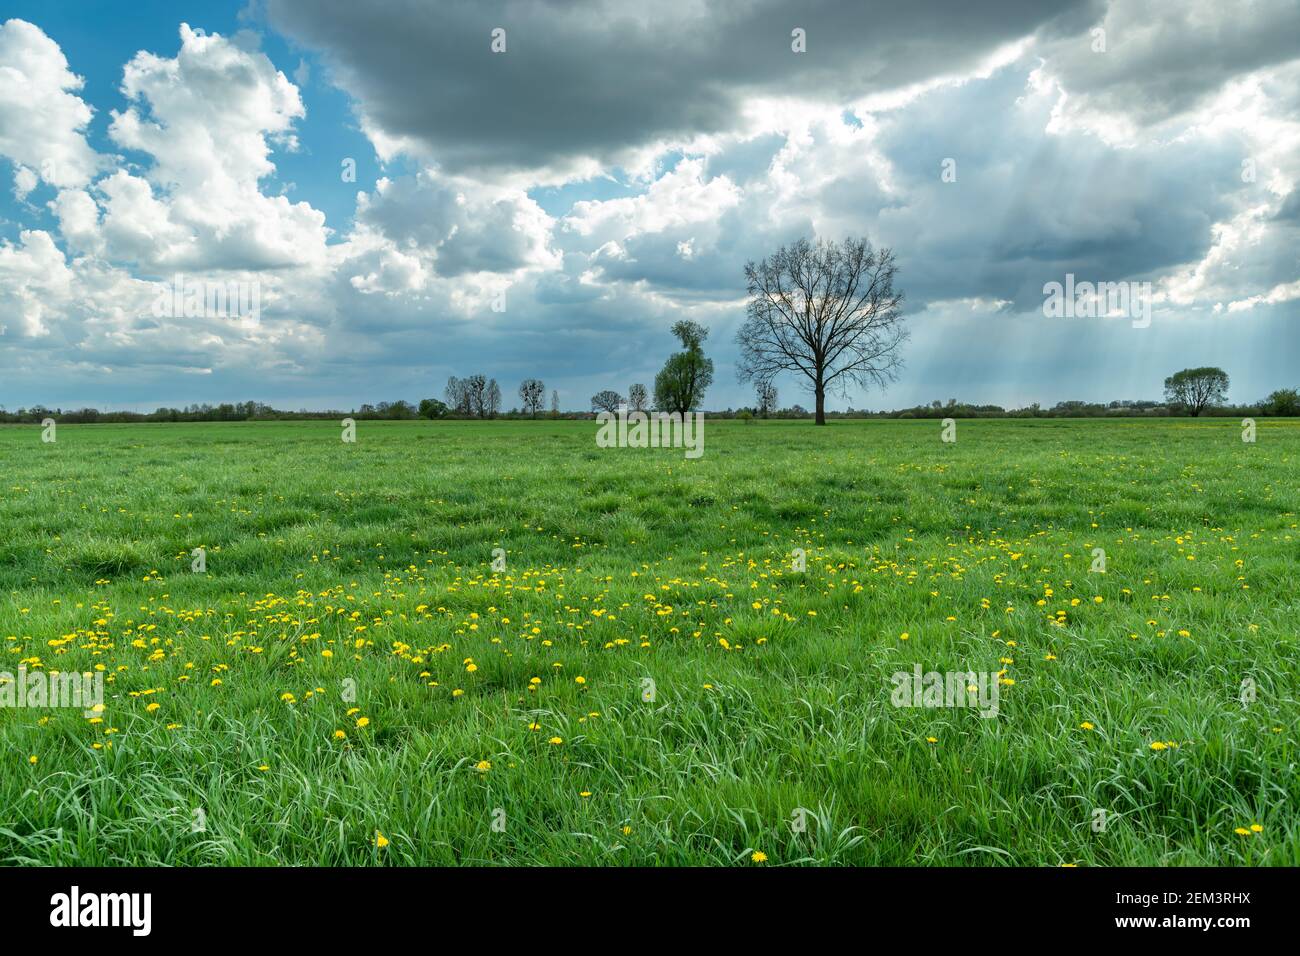 Yellow dandelion flowers in a green meadow, a large tree and the sun behind the clouds, spring view Stock Photo